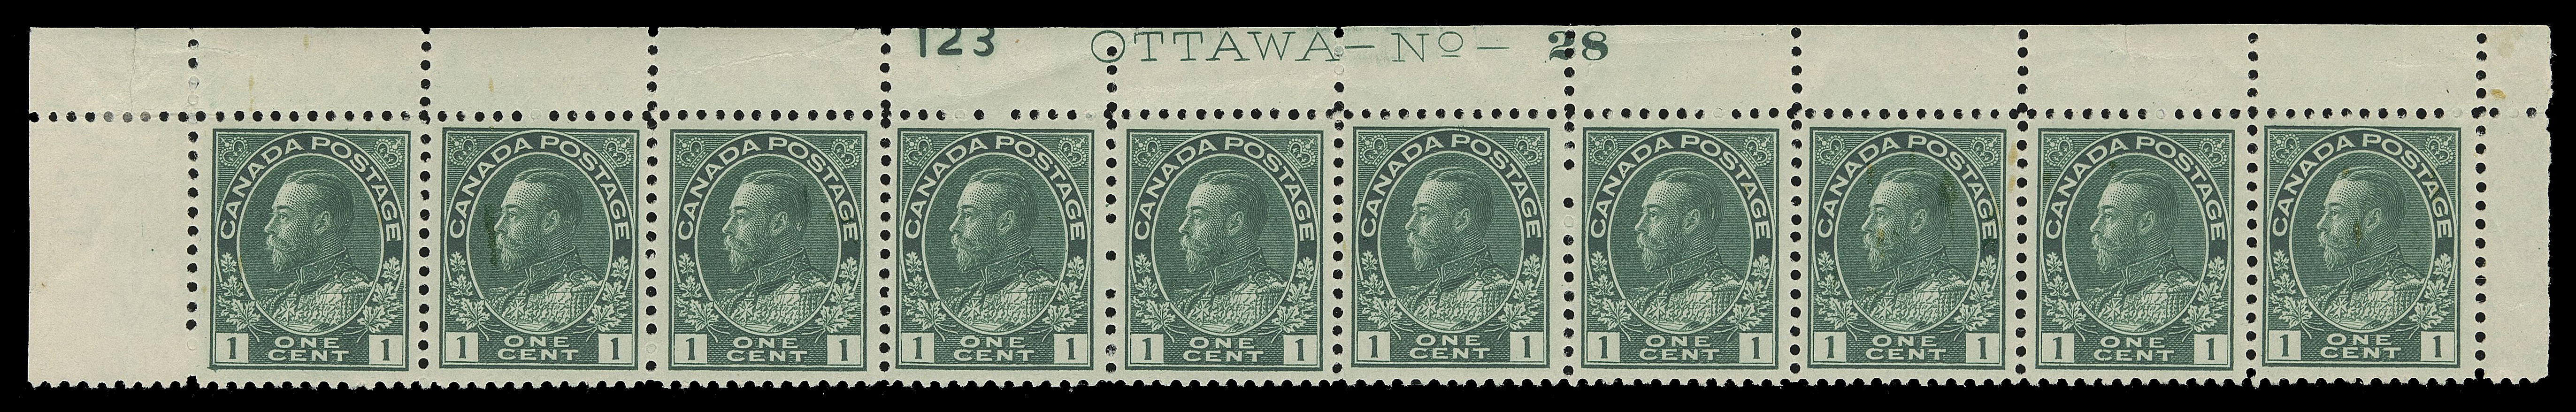 ADMIRAL STAMPS  104b,Upper left Plate 28 strip of ten with printing order number "123", lovely deep rich colour, unusually well centered, five stamps are NH, VF LH (Unitrade cat. $1,200)